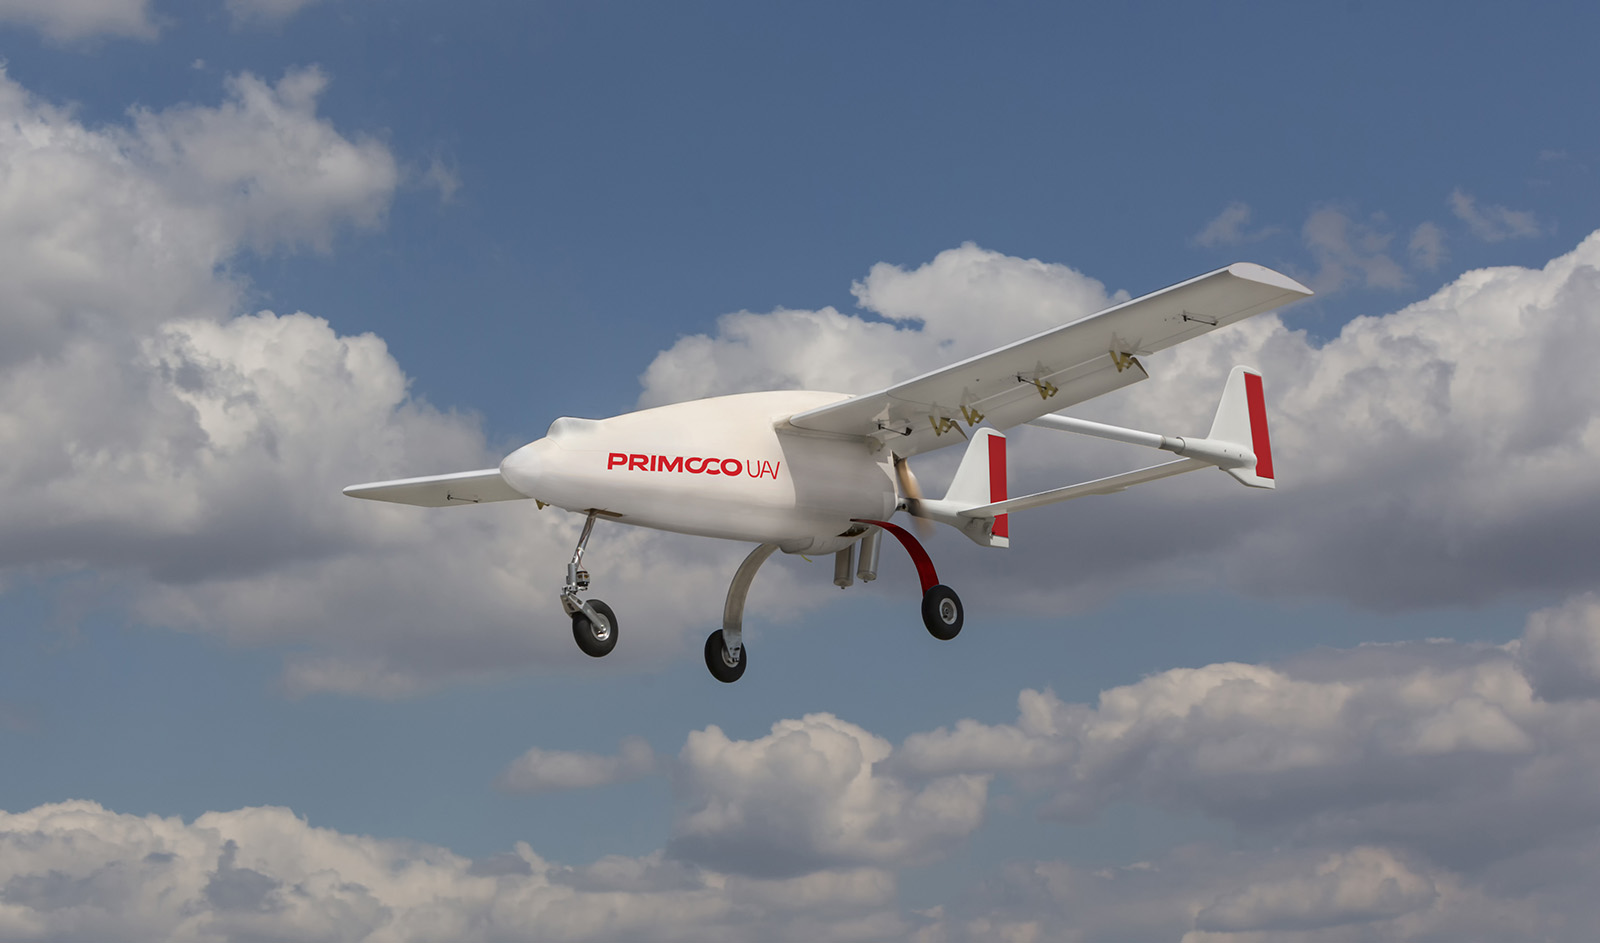 Czech UAV planes to be manufactured under licence in China - sUAS News